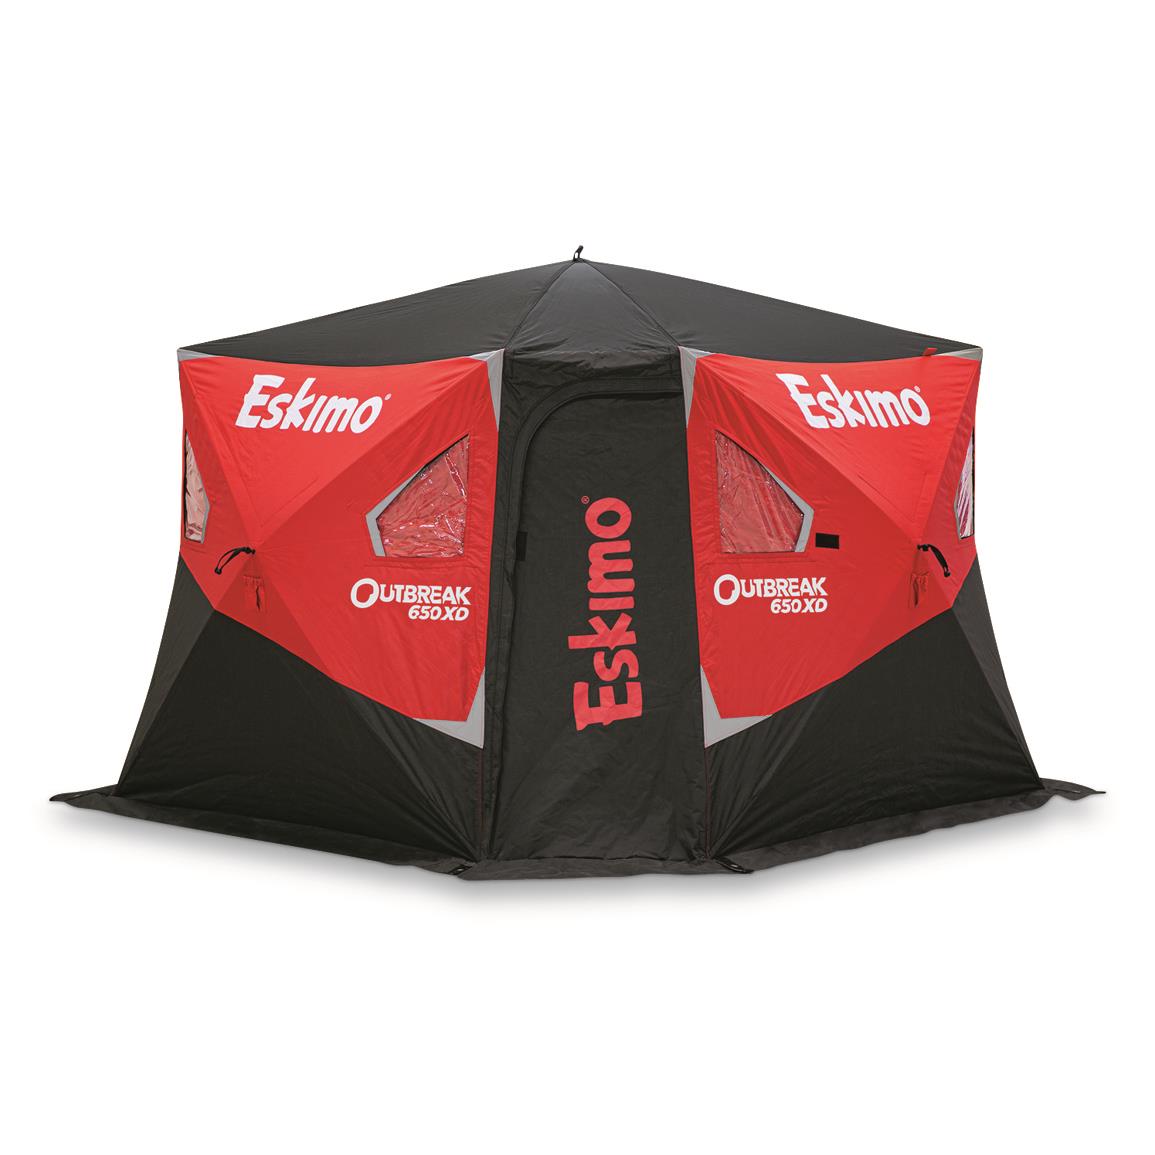 Eskimo Outbreak 650XD Insulated Hub-Style Ice Fishing Shelter, 7-Person